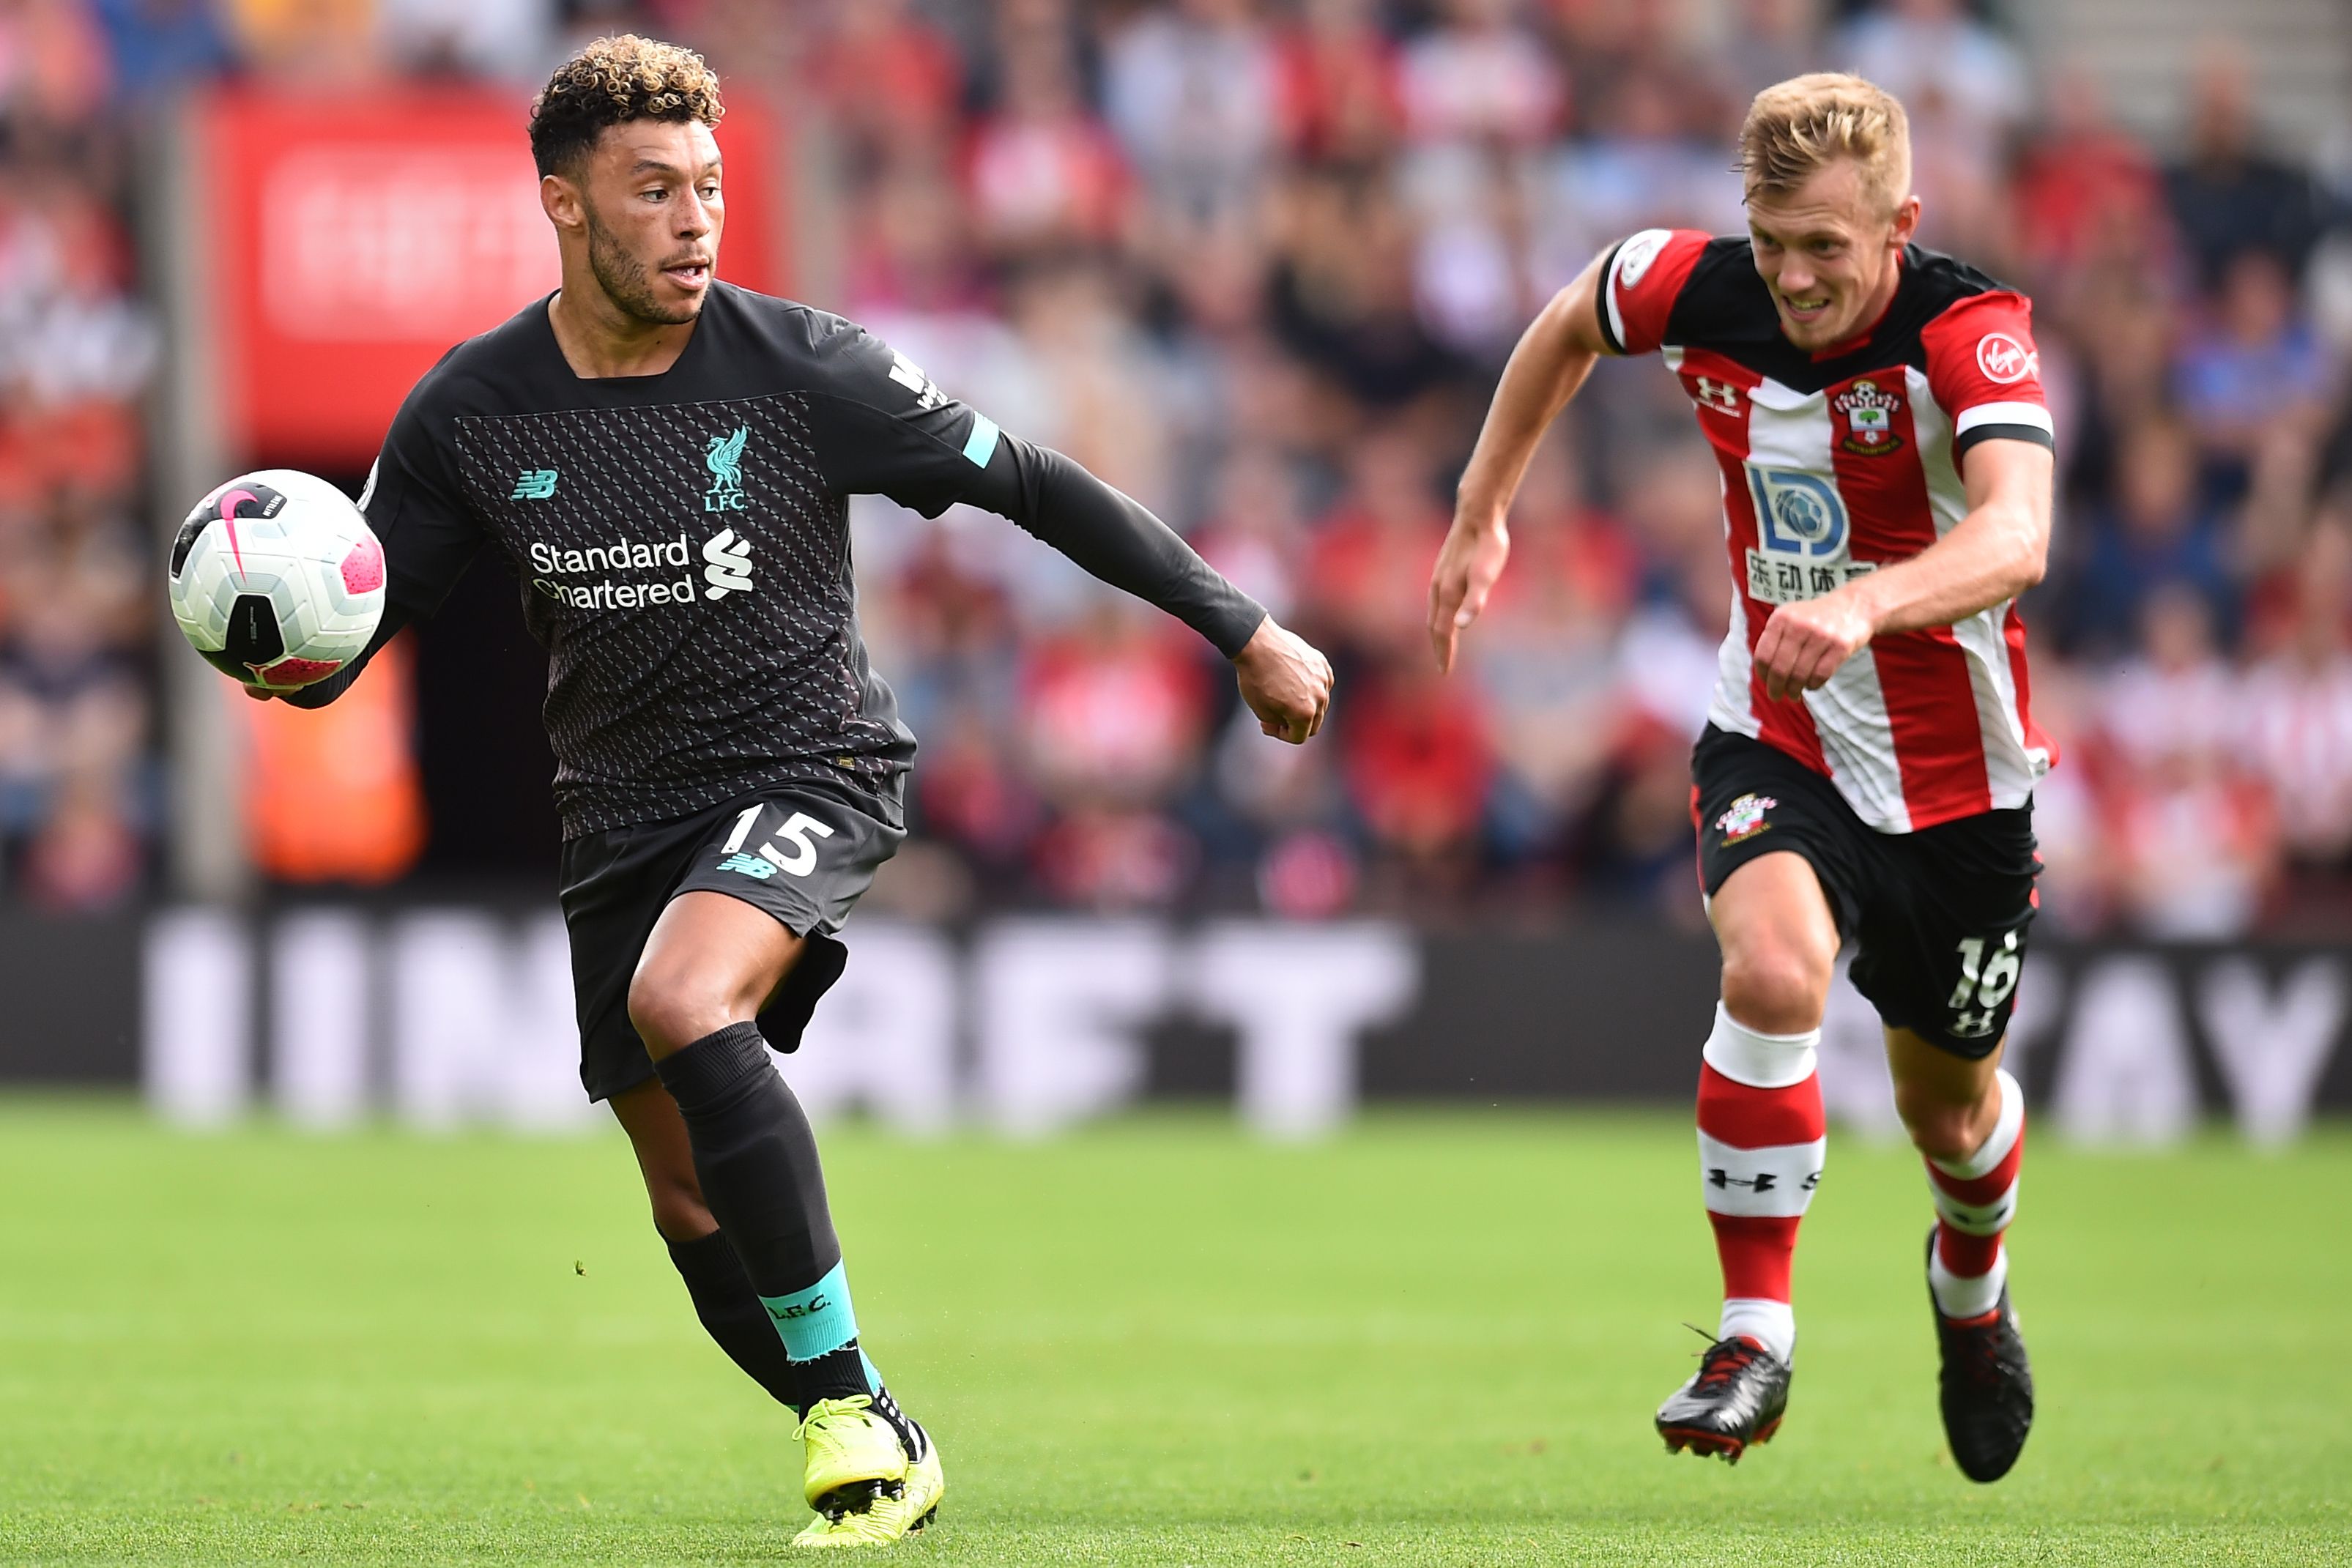 James Ward-Prowse (R) will be raring to go for Southampton in the 2020/21 season. (Photo by Glyn Kirk/AFP/Getty Images)